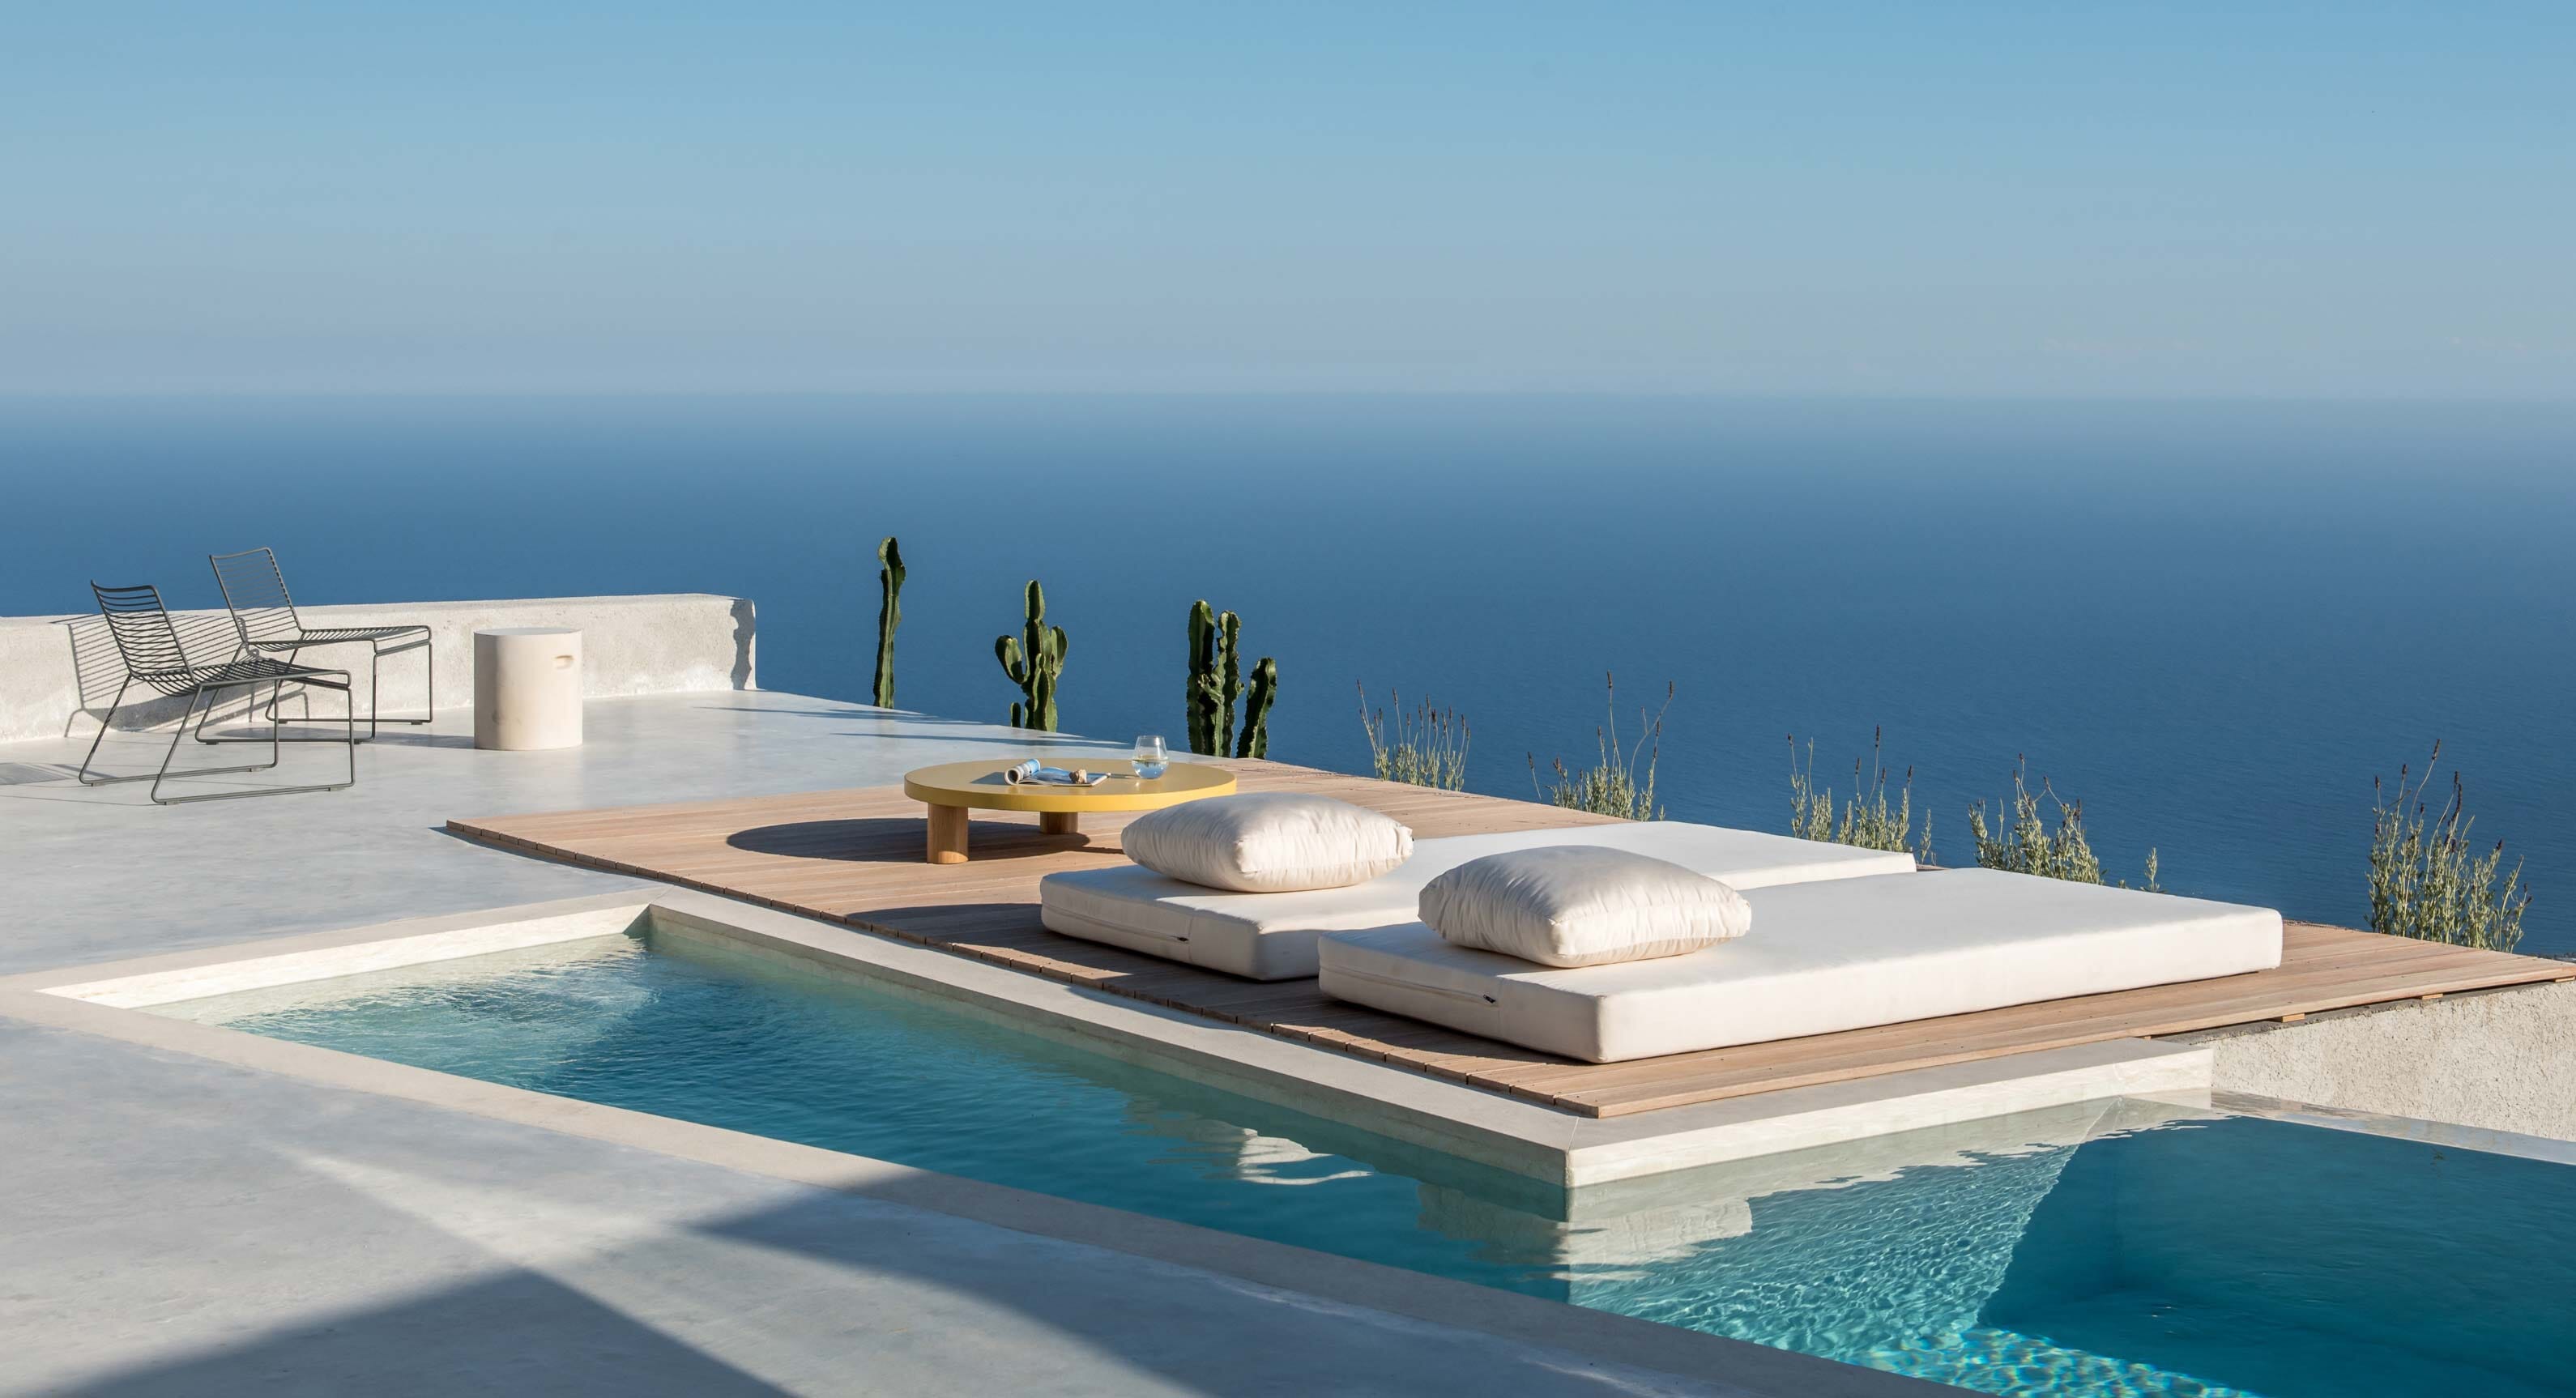 Nestled in Santorini’s Mountainside: The Holiday Home of Dreams